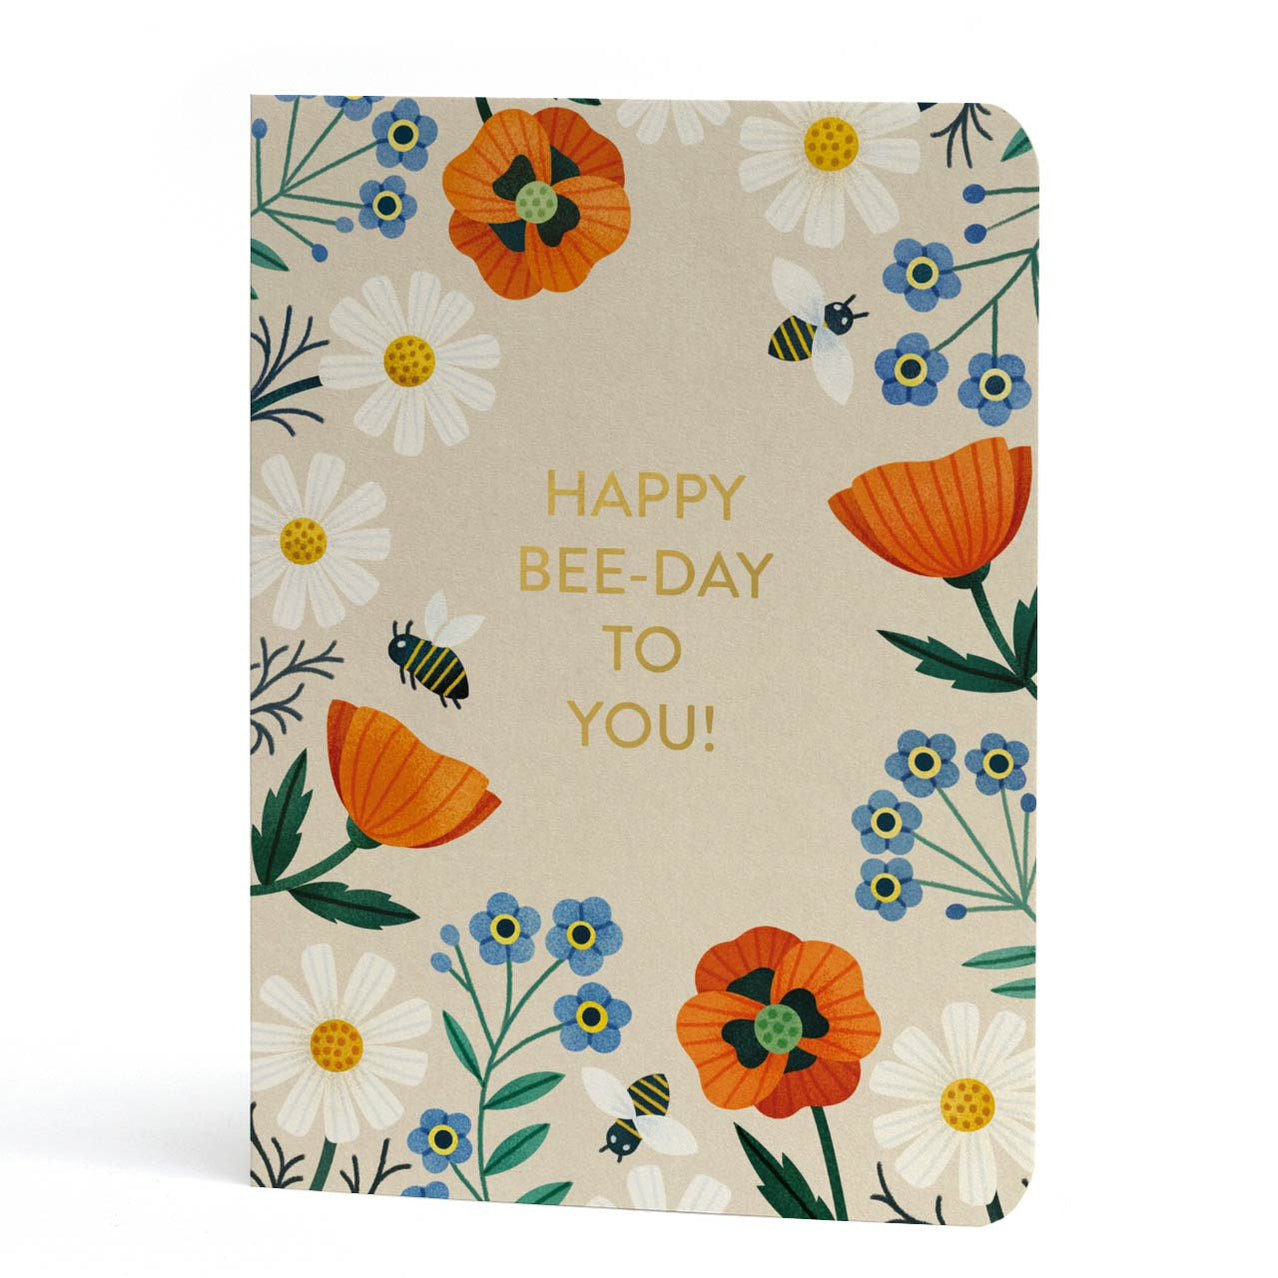 Cool, Quirky and Cute Birthday Cards | The Curious Pancake